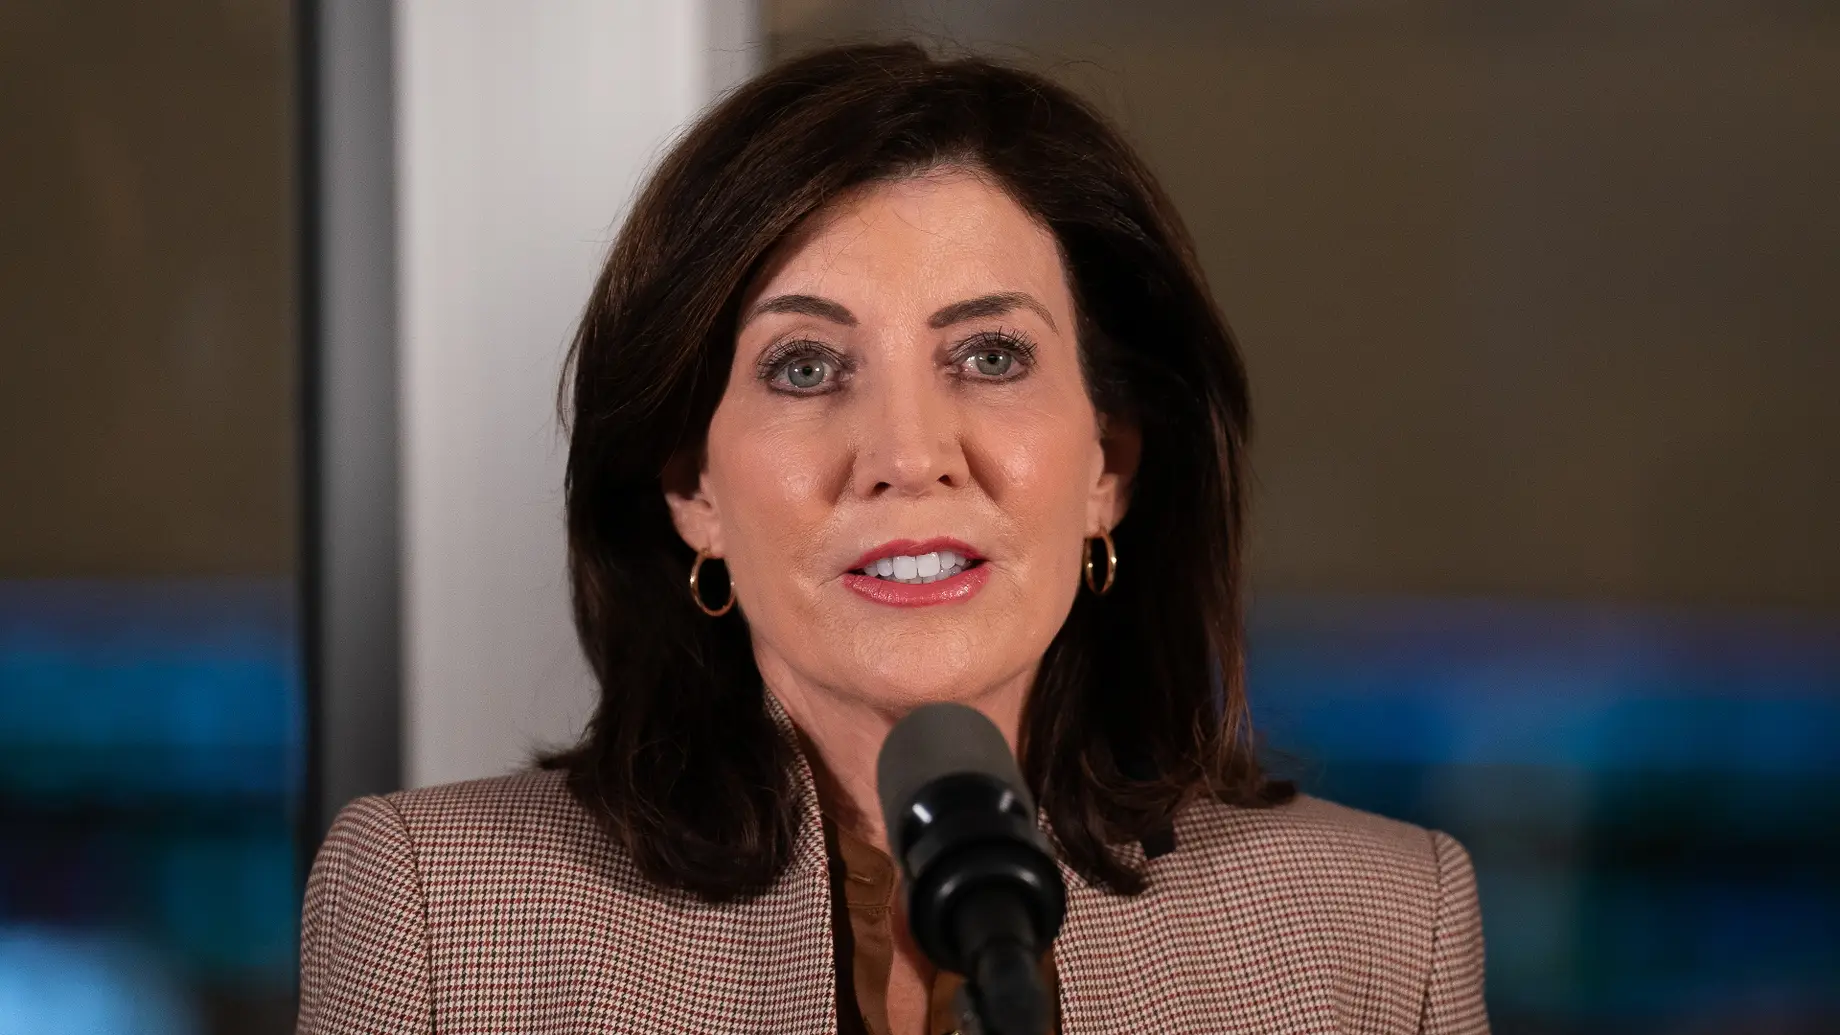 New York Gov. Kathy Hochul Apologizes for Claiming Black Children in the Bronx ‘Don’t Even Know What the Word Computer Is’